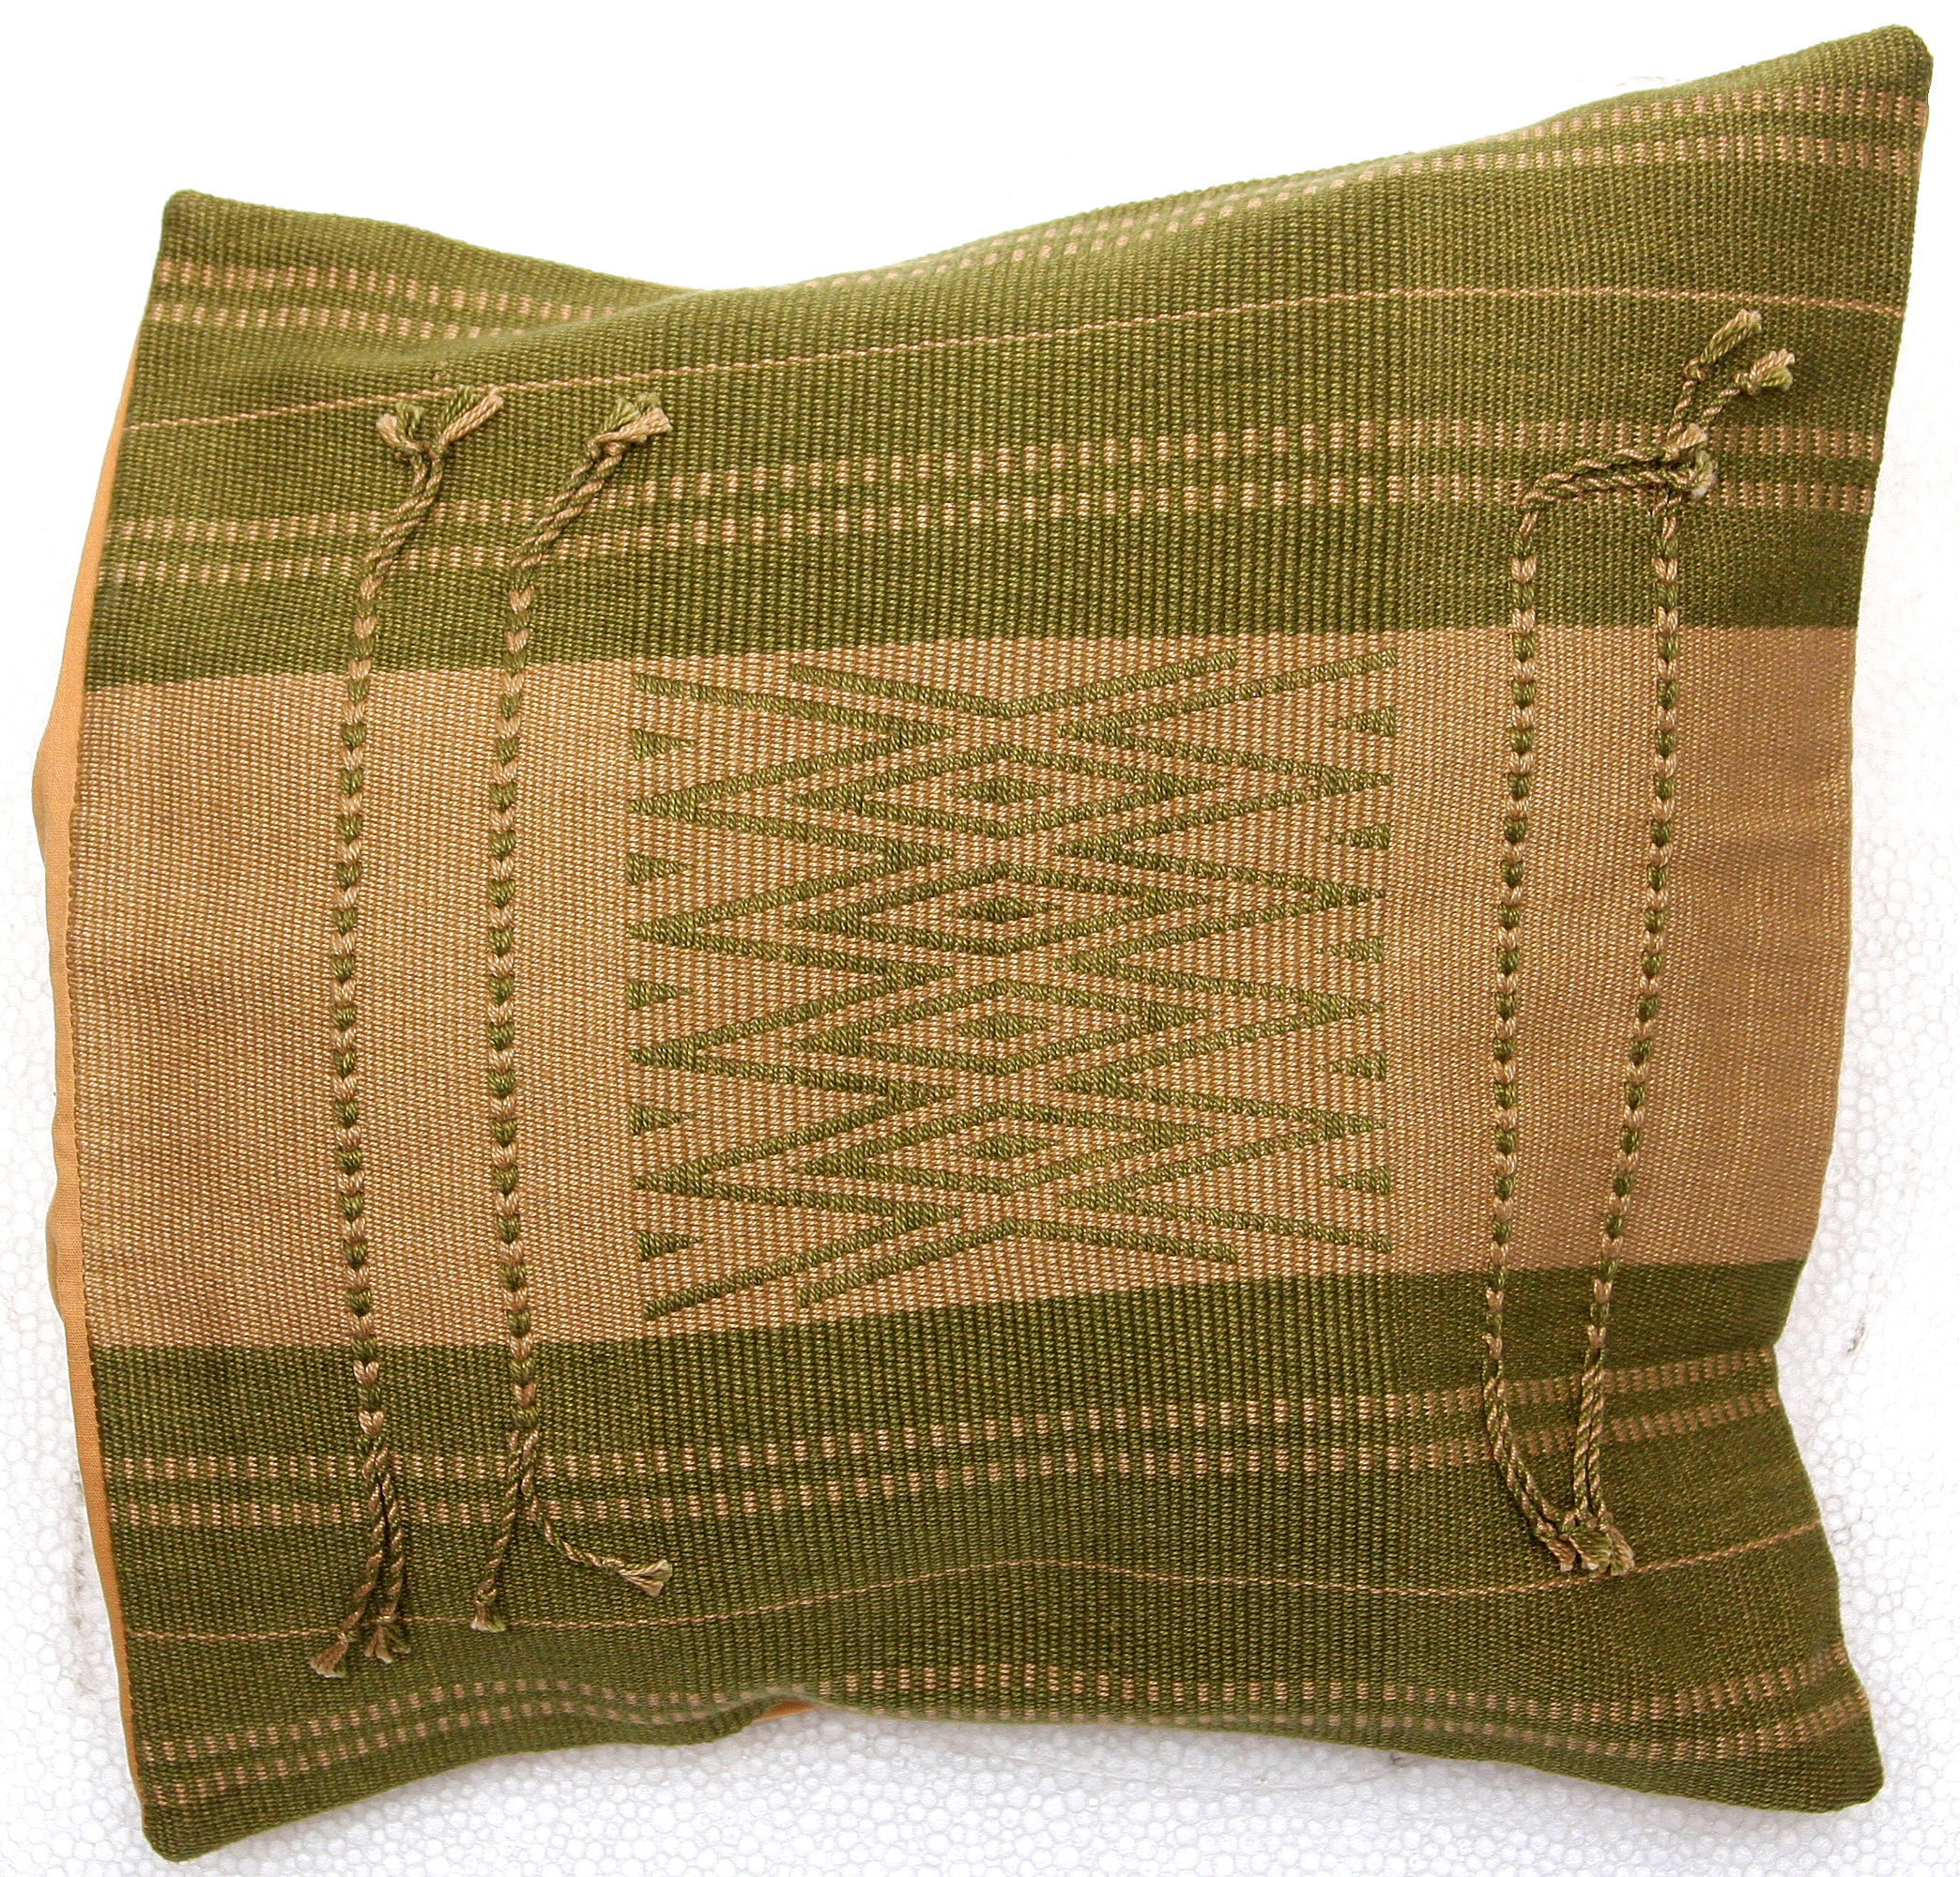 Beige and Green Hand-woven Cushion Cover from Nagaland with Tribal Motifs |  Exotic India Art